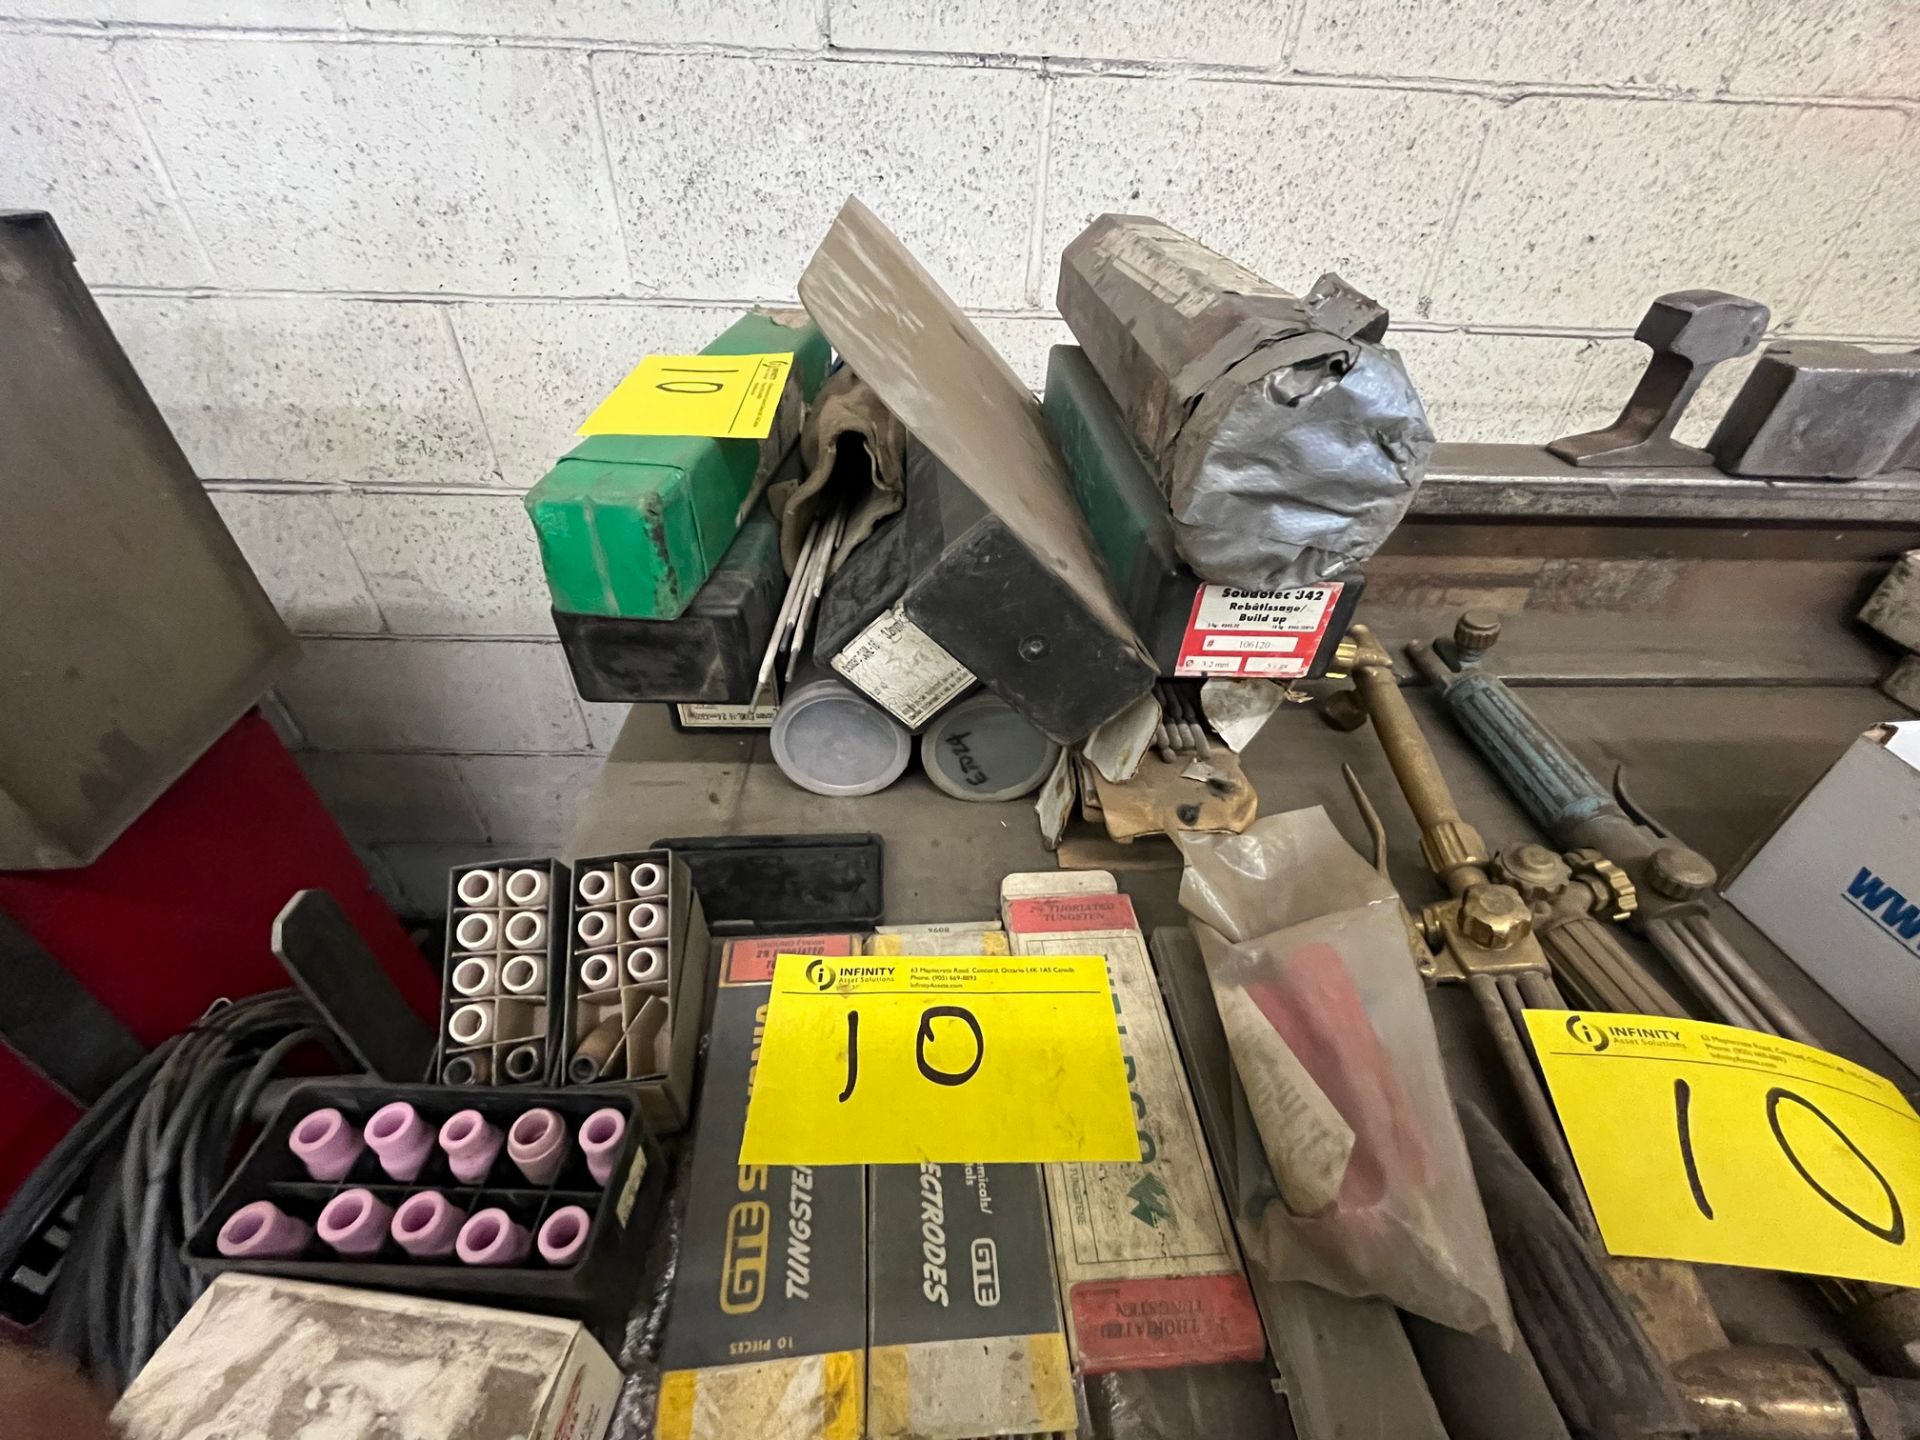 LOT OF WELDING TORCHES, ELECTRODES, WIRE REELS, TOOLS, TIPS, REGULATORS, ETC. - Image 2 of 7